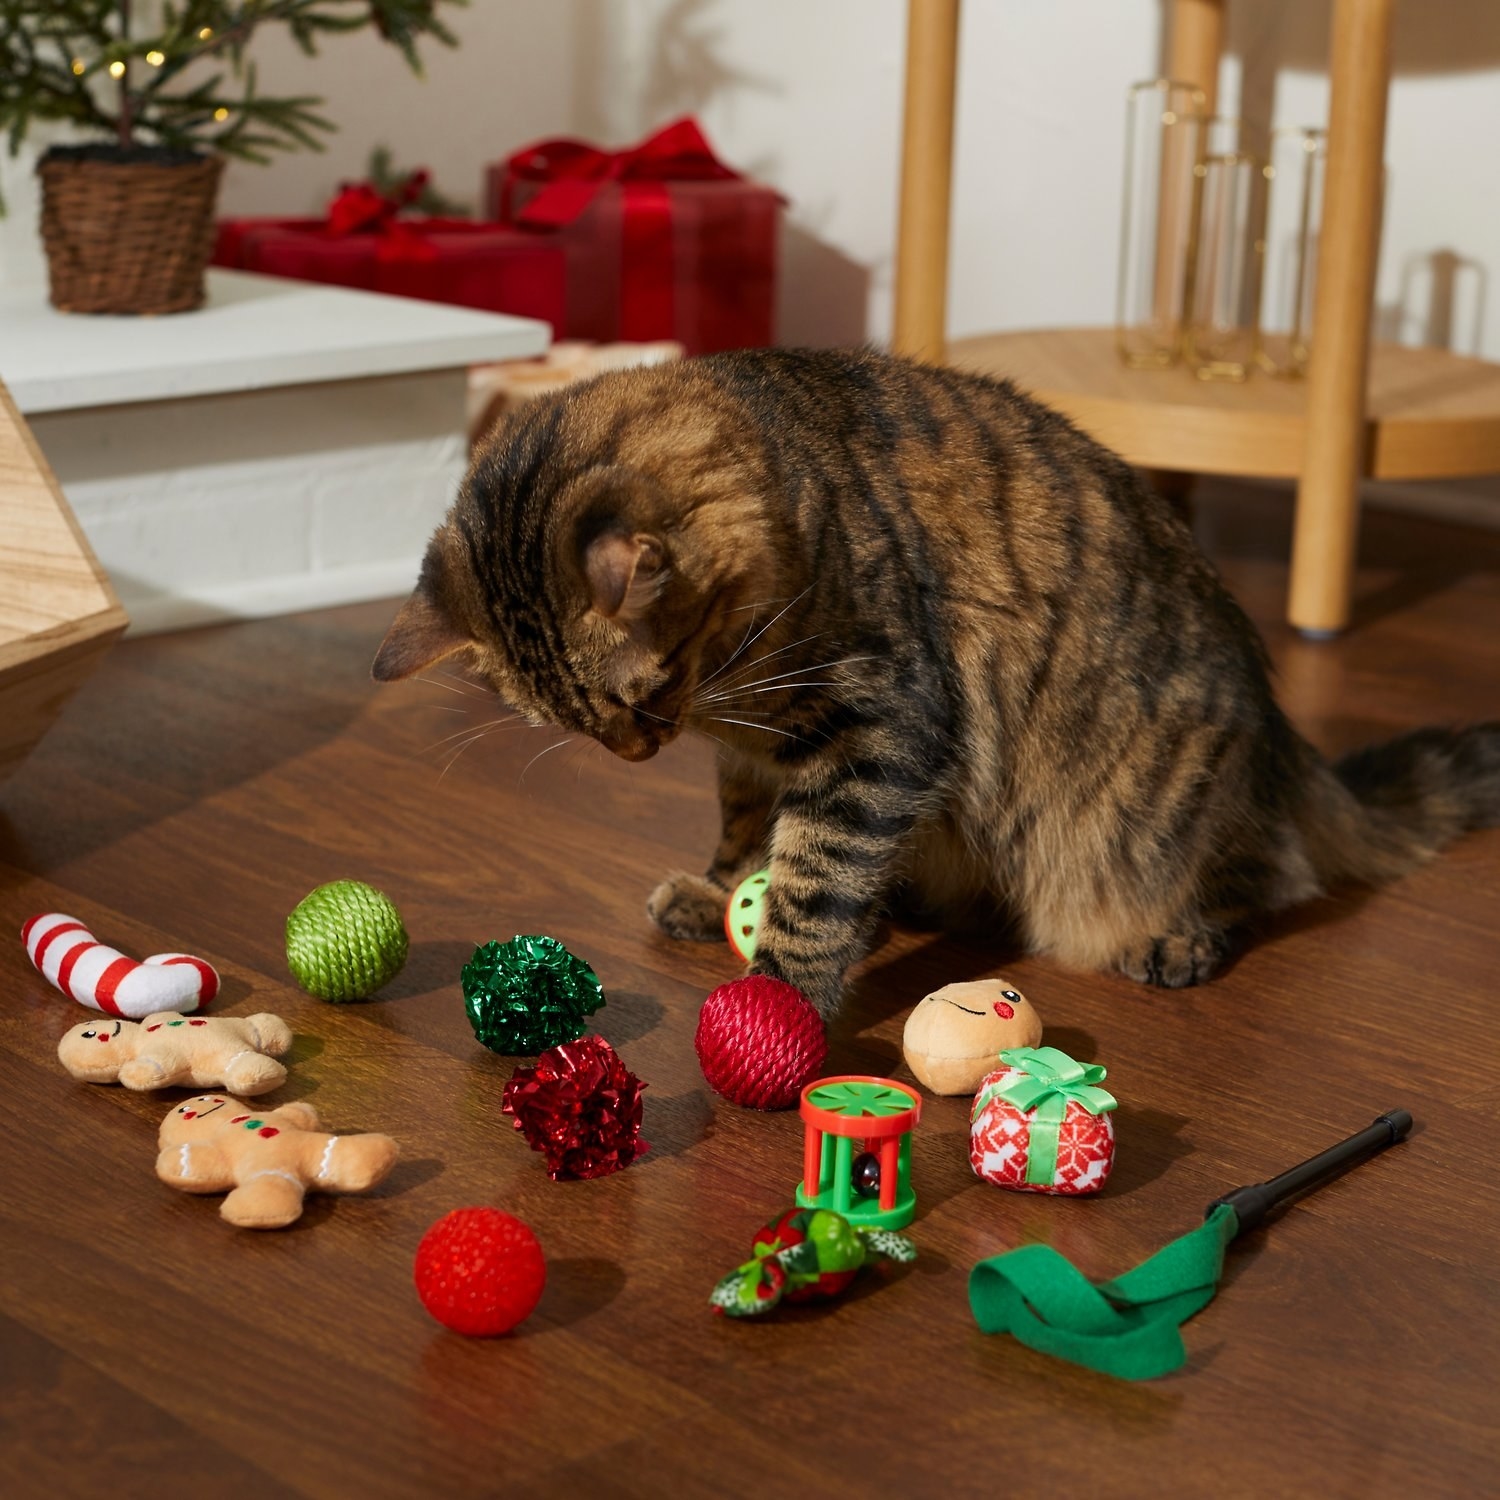 A cat looking at variety of red, holiday-themes toys